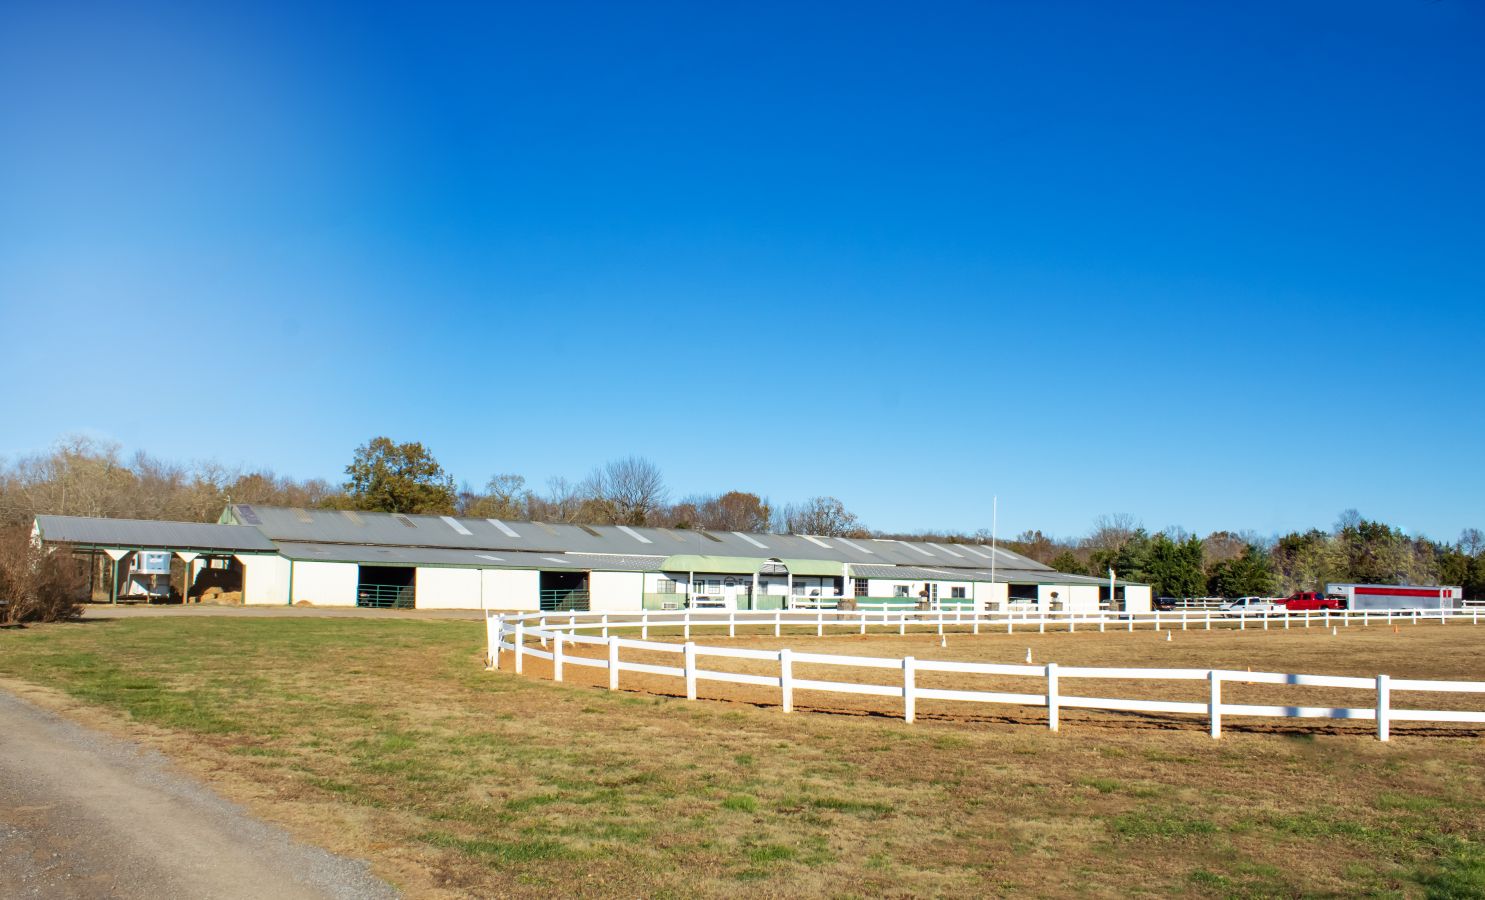 Visit Kings Equine center and overnight layovers